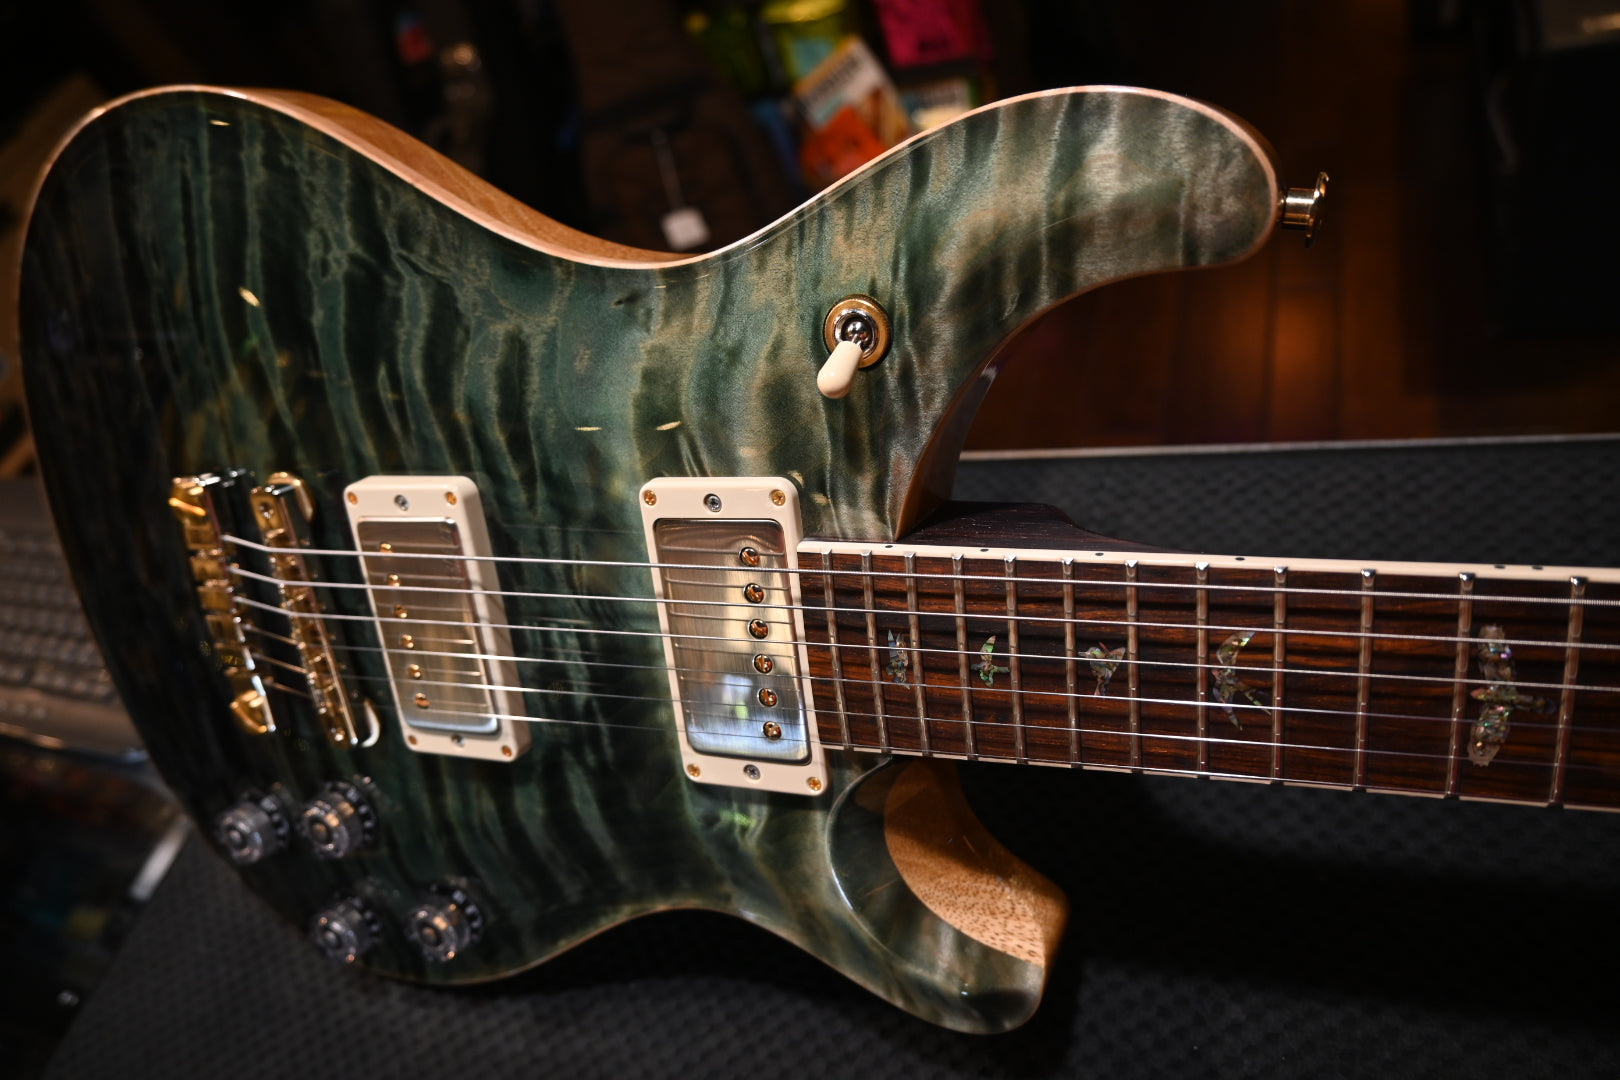 PRS Wood Library McCarty 594 10-Top Quilt Rosewood Neck - Trampas Green Fade Guitar #8975 - Danville Music